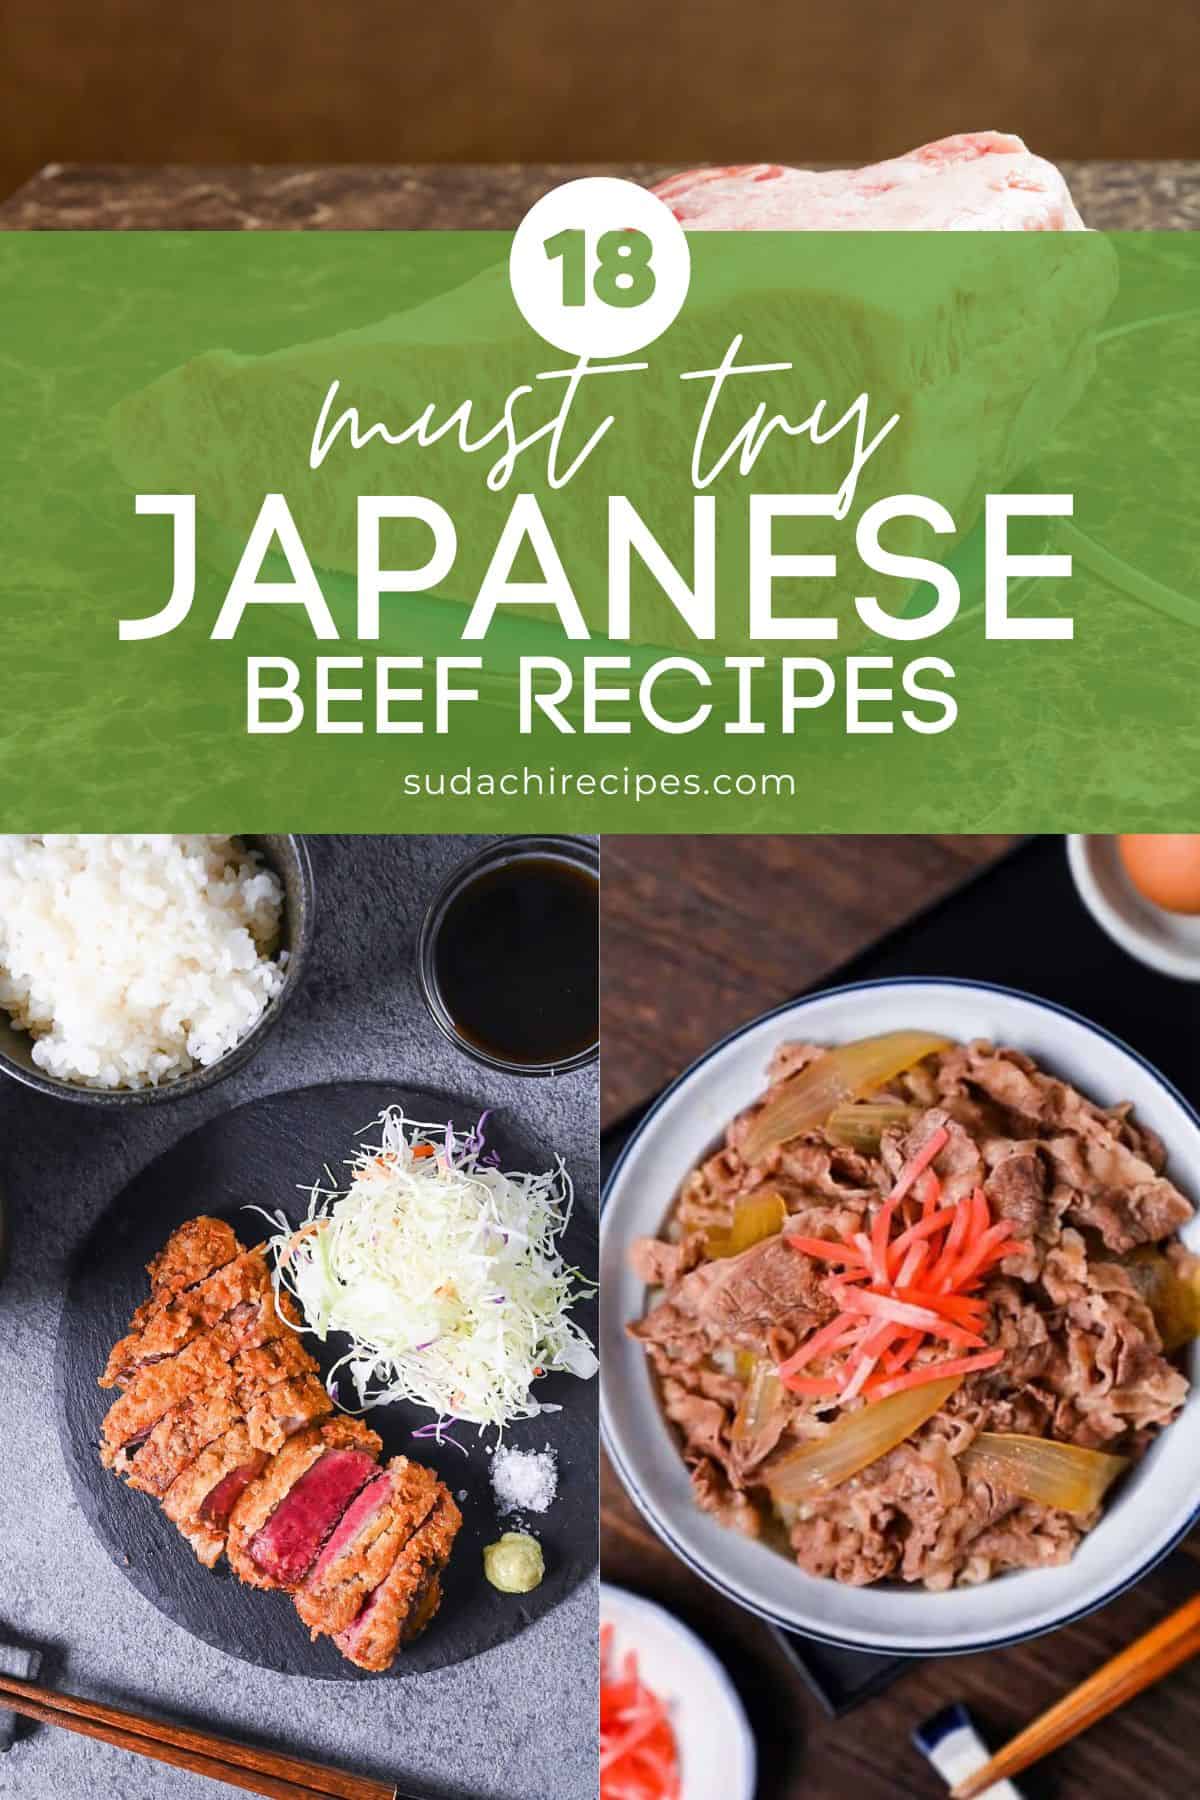 Japanese beef recipes